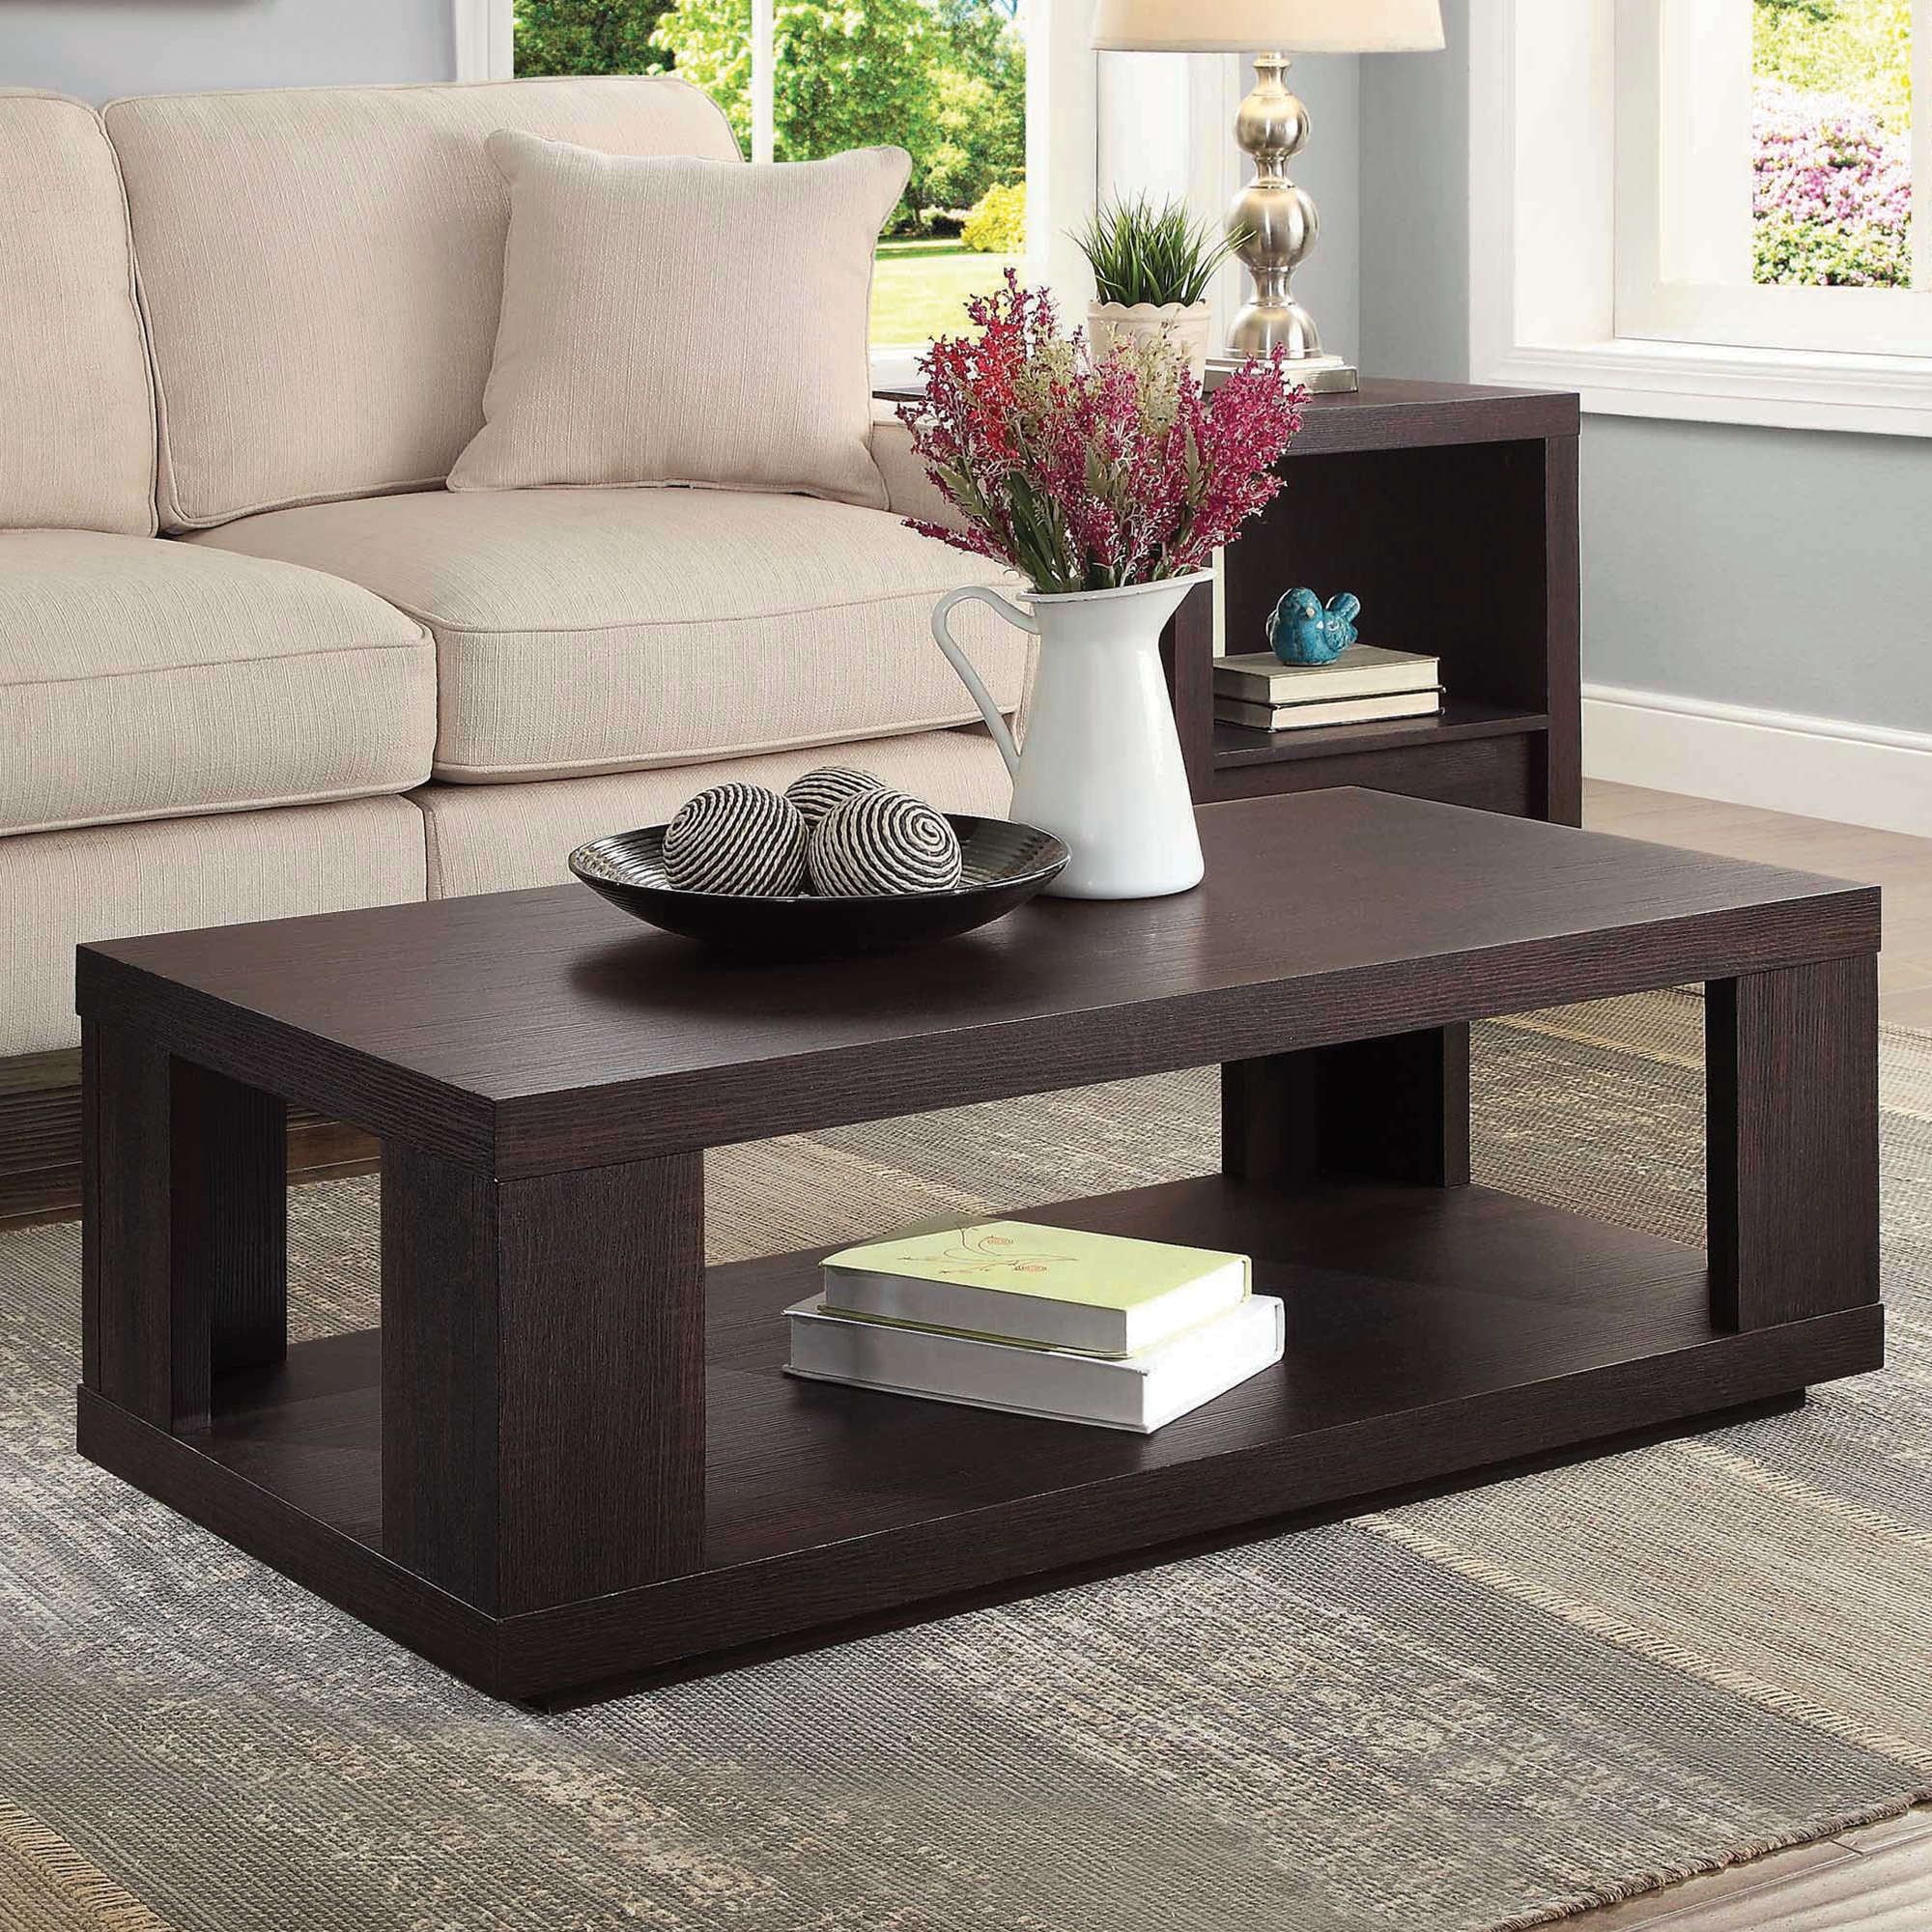 Better Homes & Gardens Steele Coffee Table With Lower Shelf, Espresso With Espresso Wood Finish Coffee Tables (View 19 of 21)